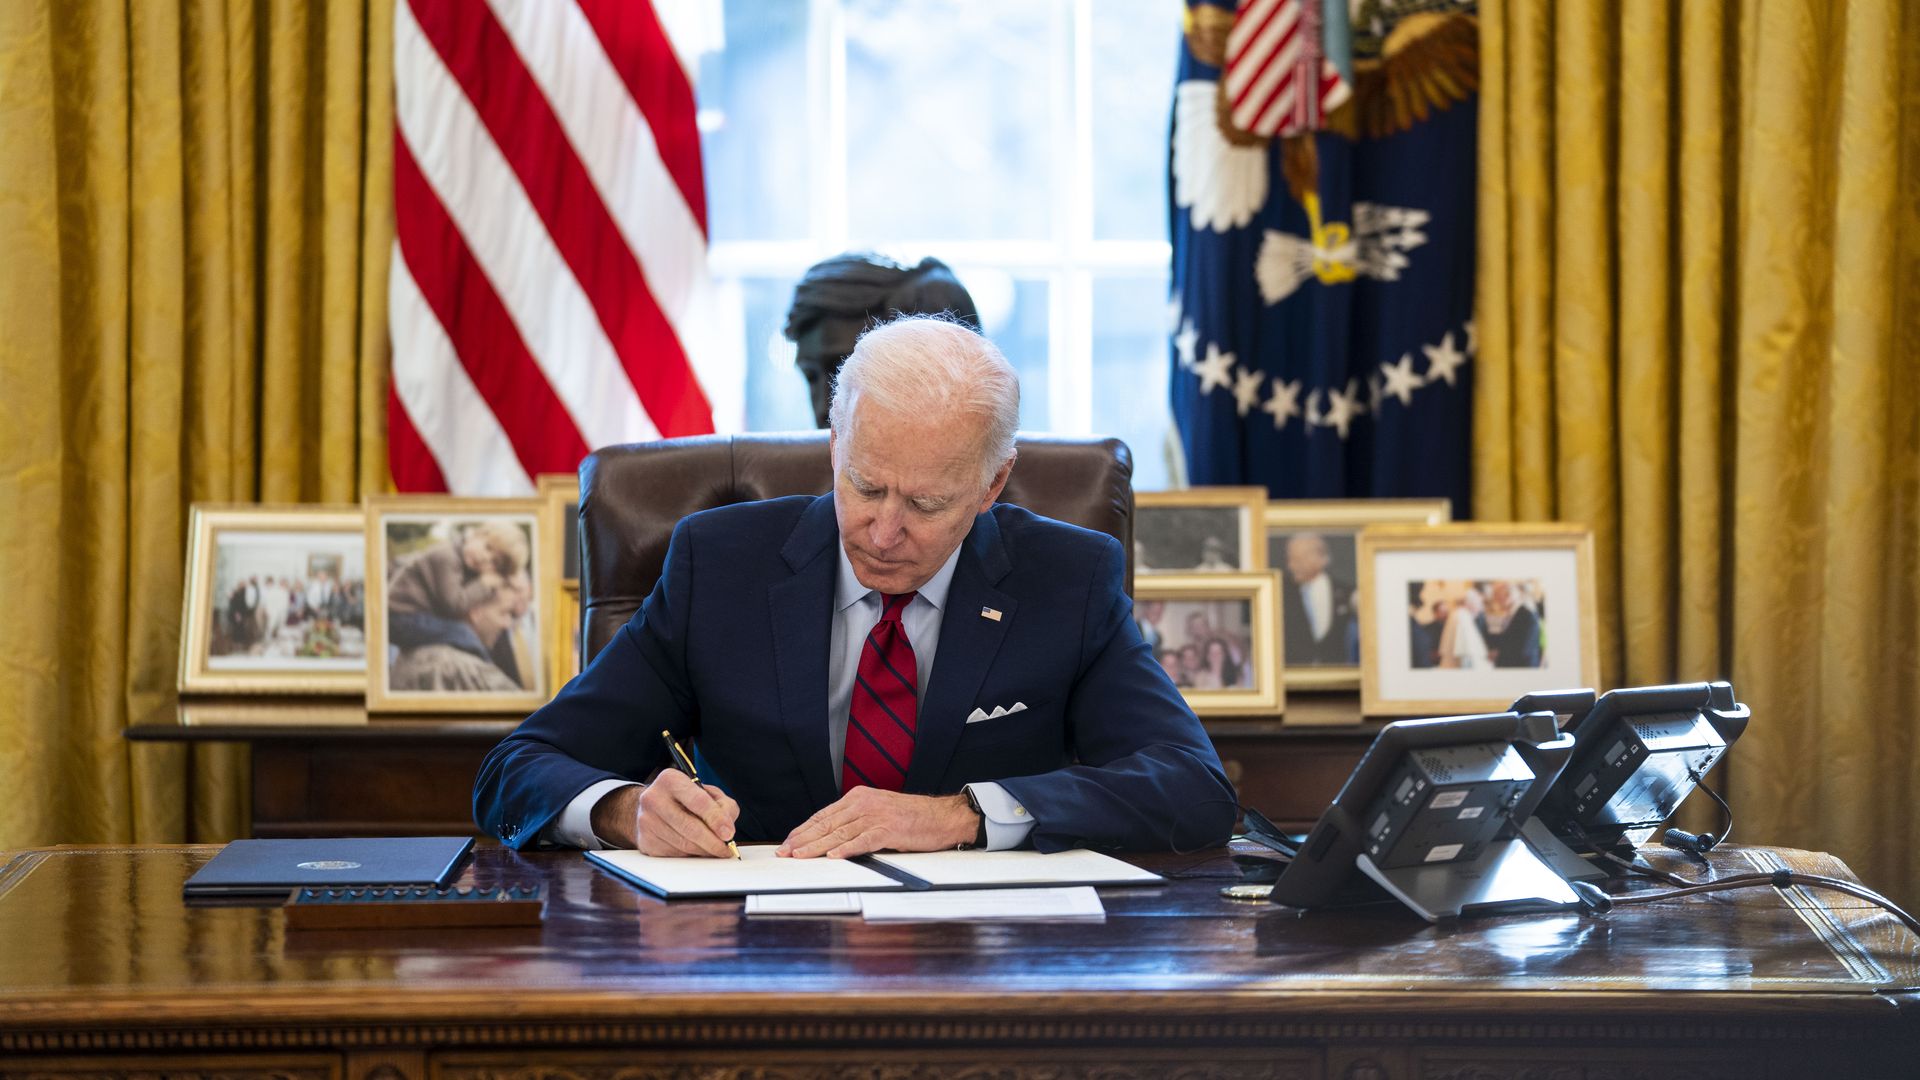 Picture of Joe Biden signing an executive order in the Oval Office